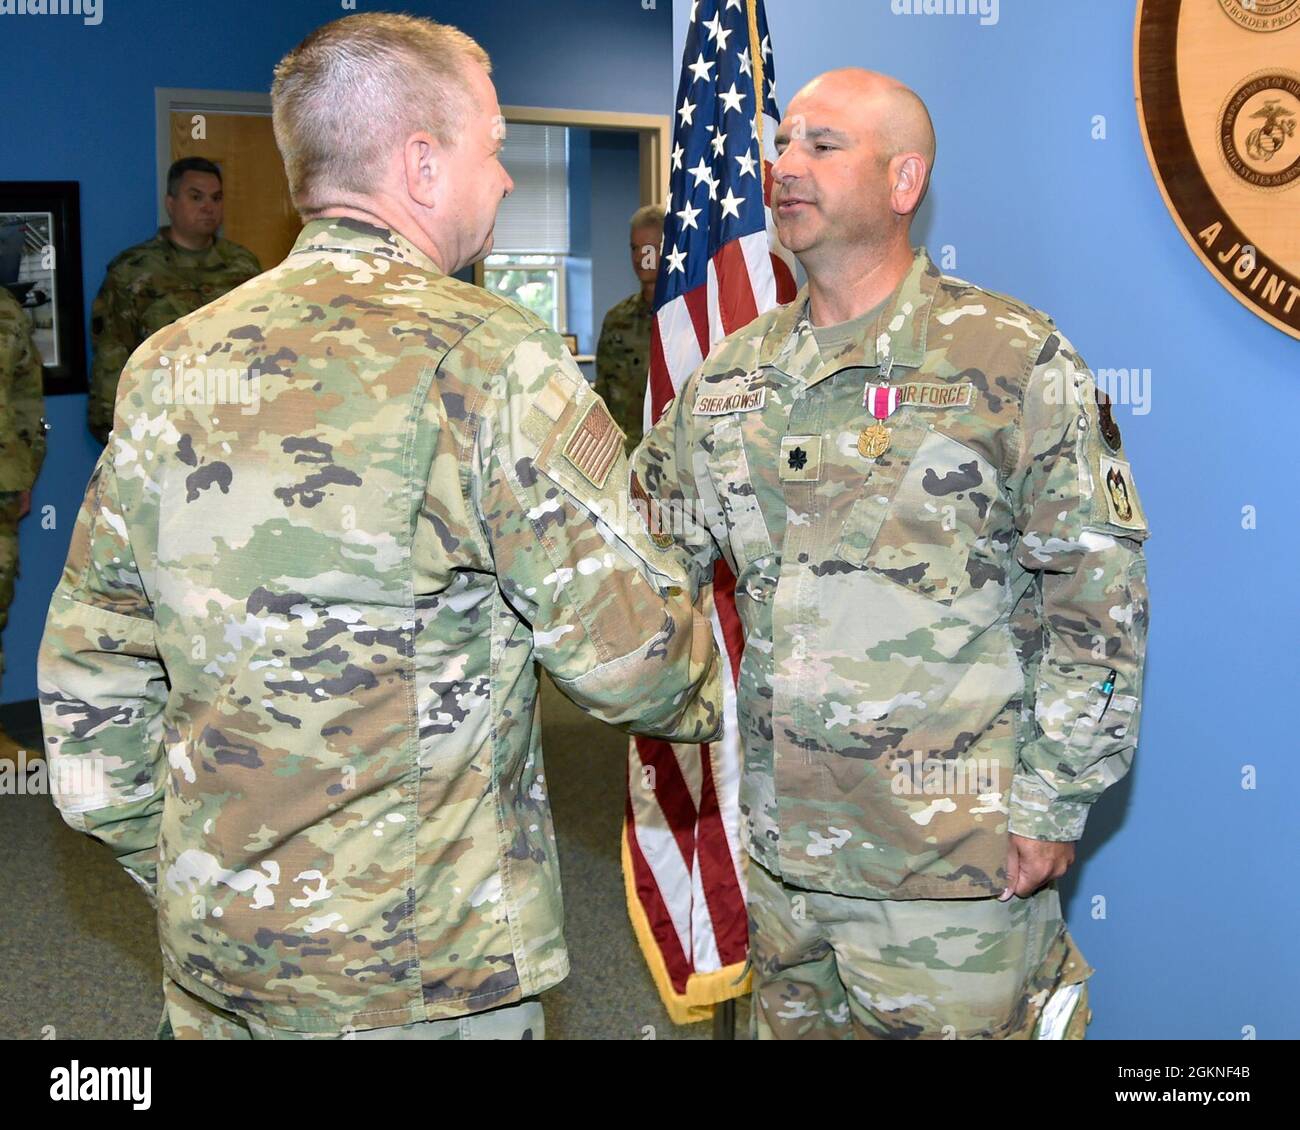 SELFRIDGE AIR NATIONAL GUARD BASE, Mich.— Lt. Col. Thomas Sierakowski, inspector general of the 127th Wing here,  receives the Meritorious Service Medal from Brig. Gen. Rolf E. Mammen, 127th Wing commander, here, on June 5, 2021. Stock Photo